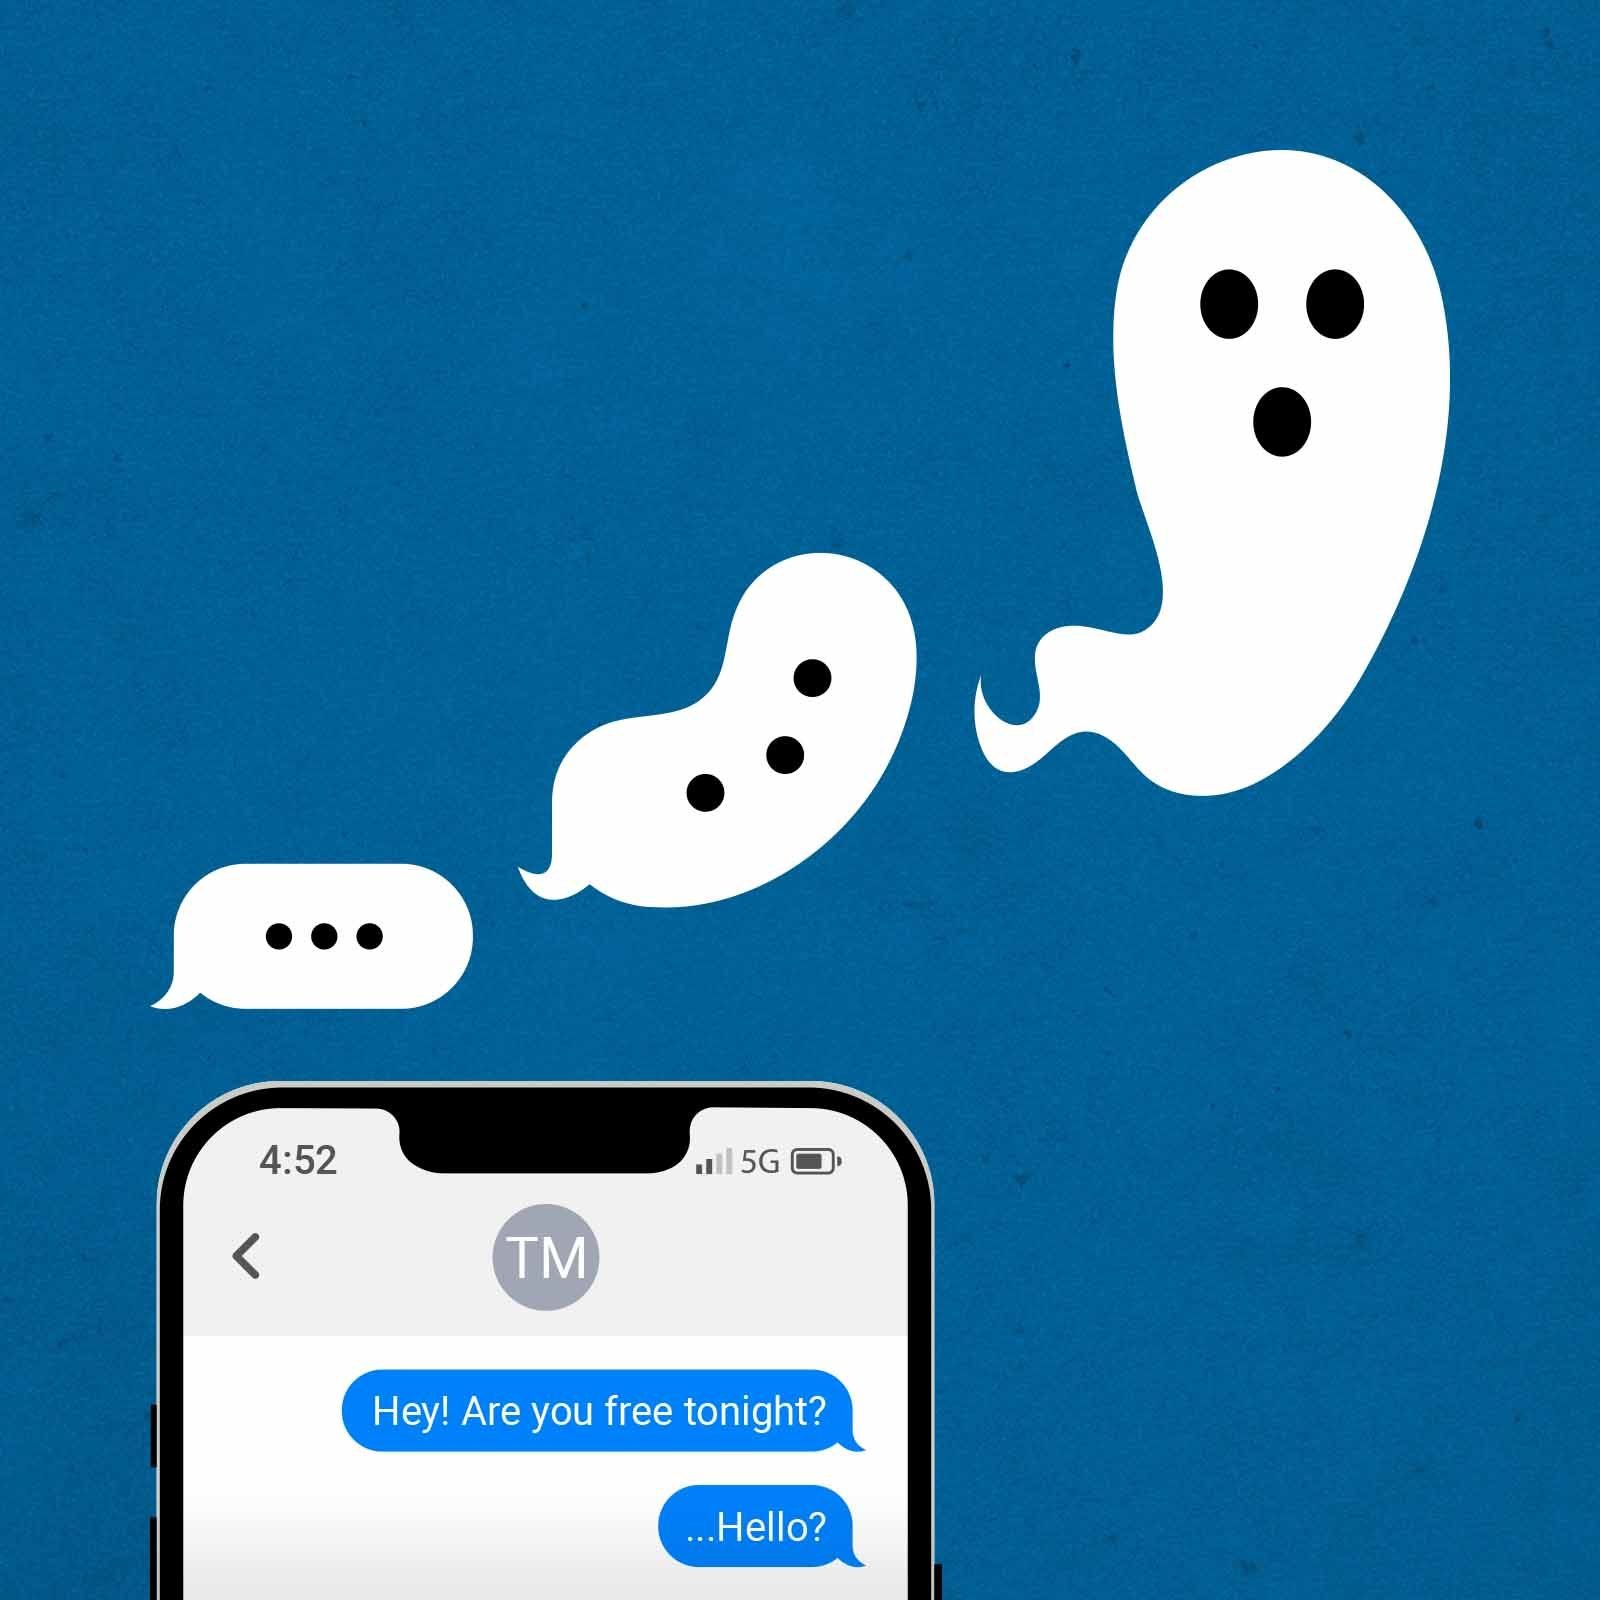 Ghosted by a potential online friend. Why bother acting friendly